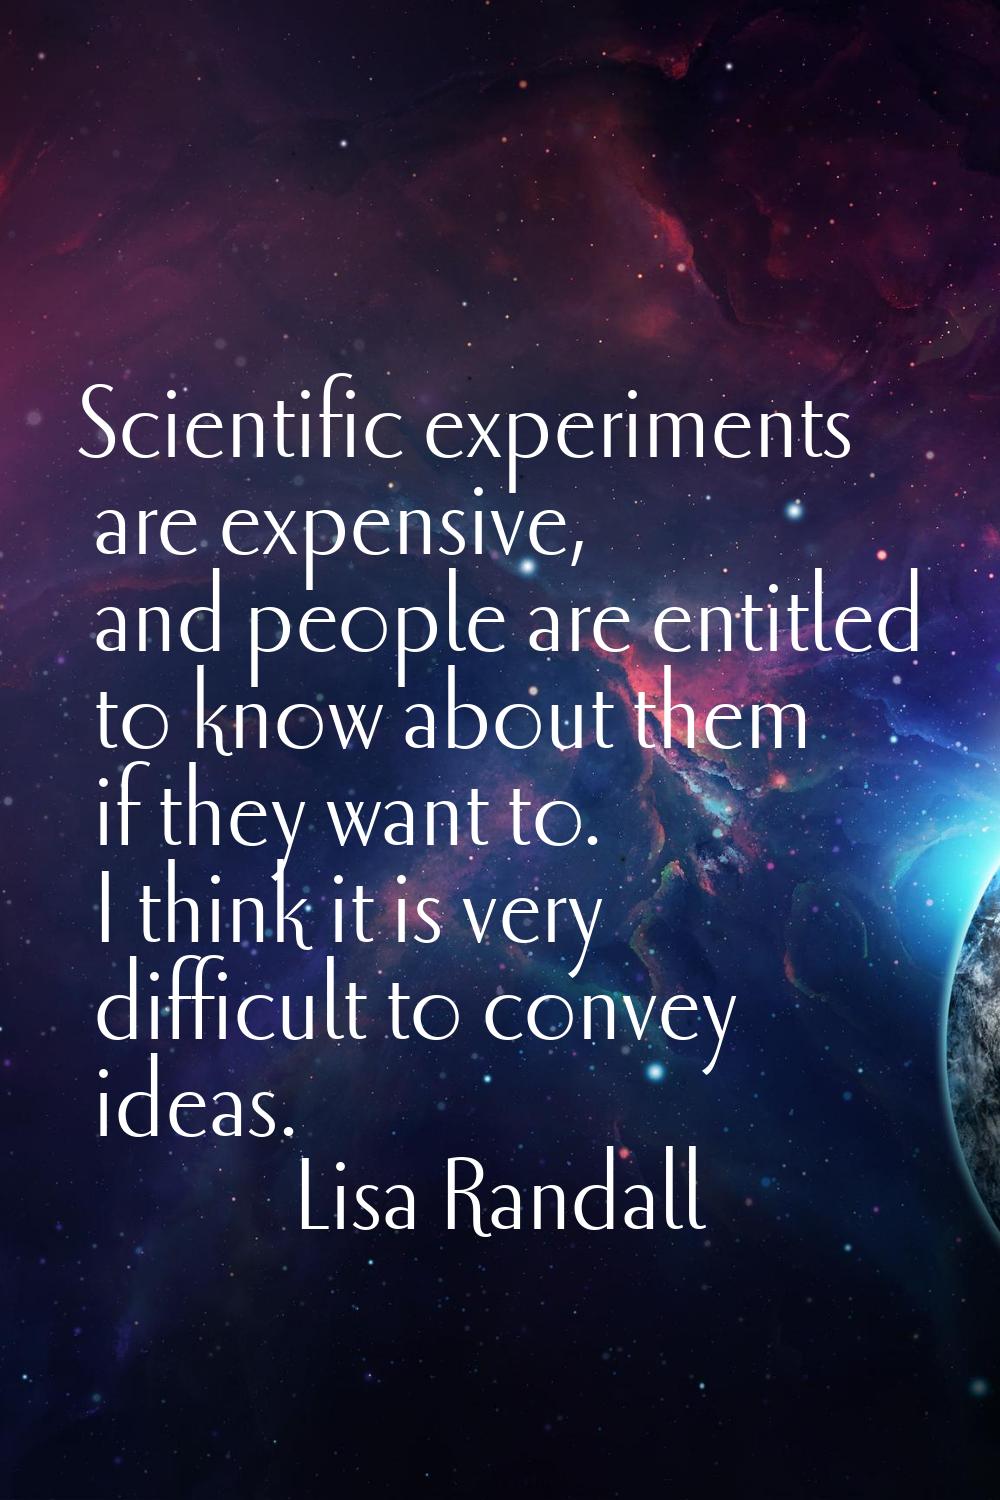 Scientific experiments are expensive, and people are entitled to know about them if they want to. I